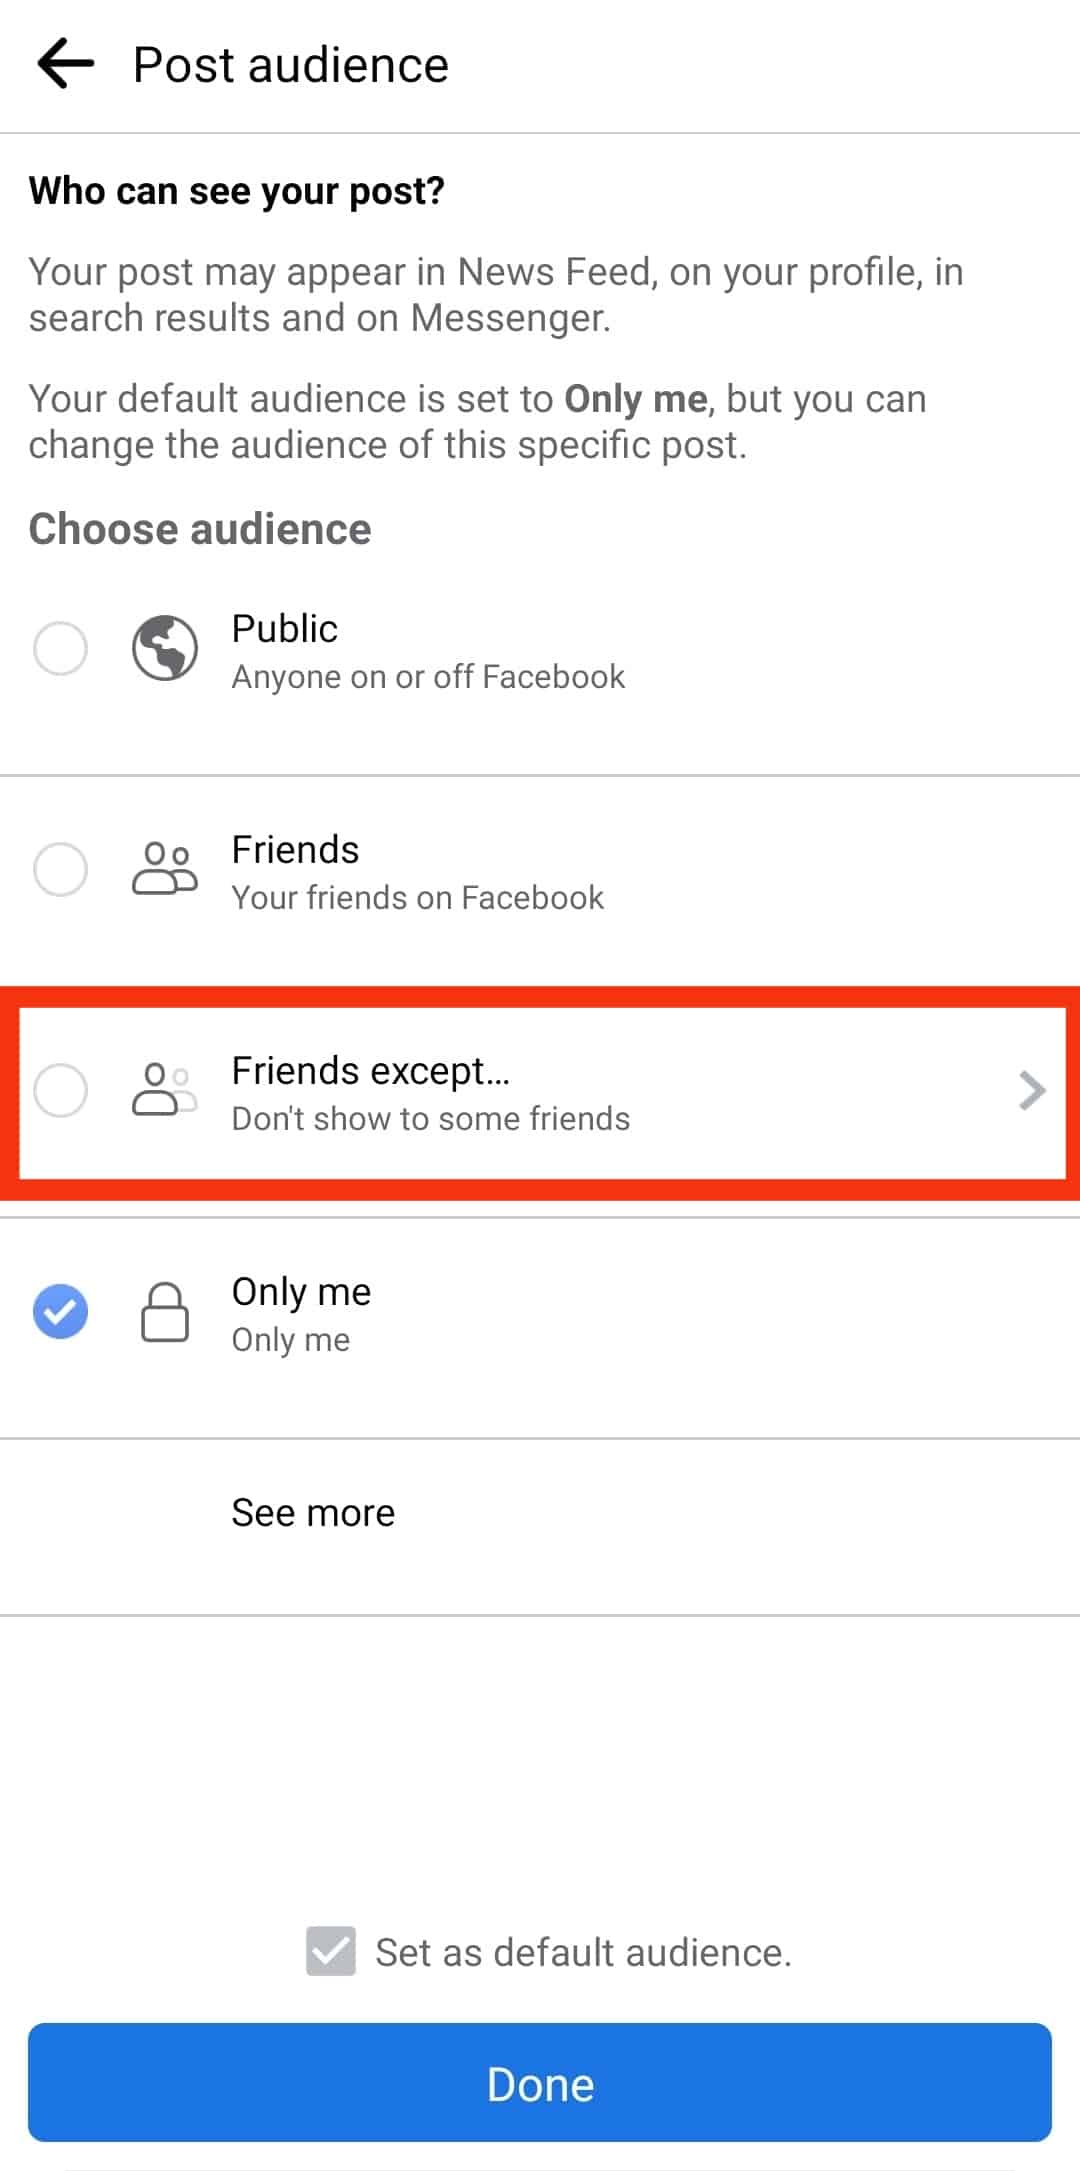 Select The Friends Except... Option